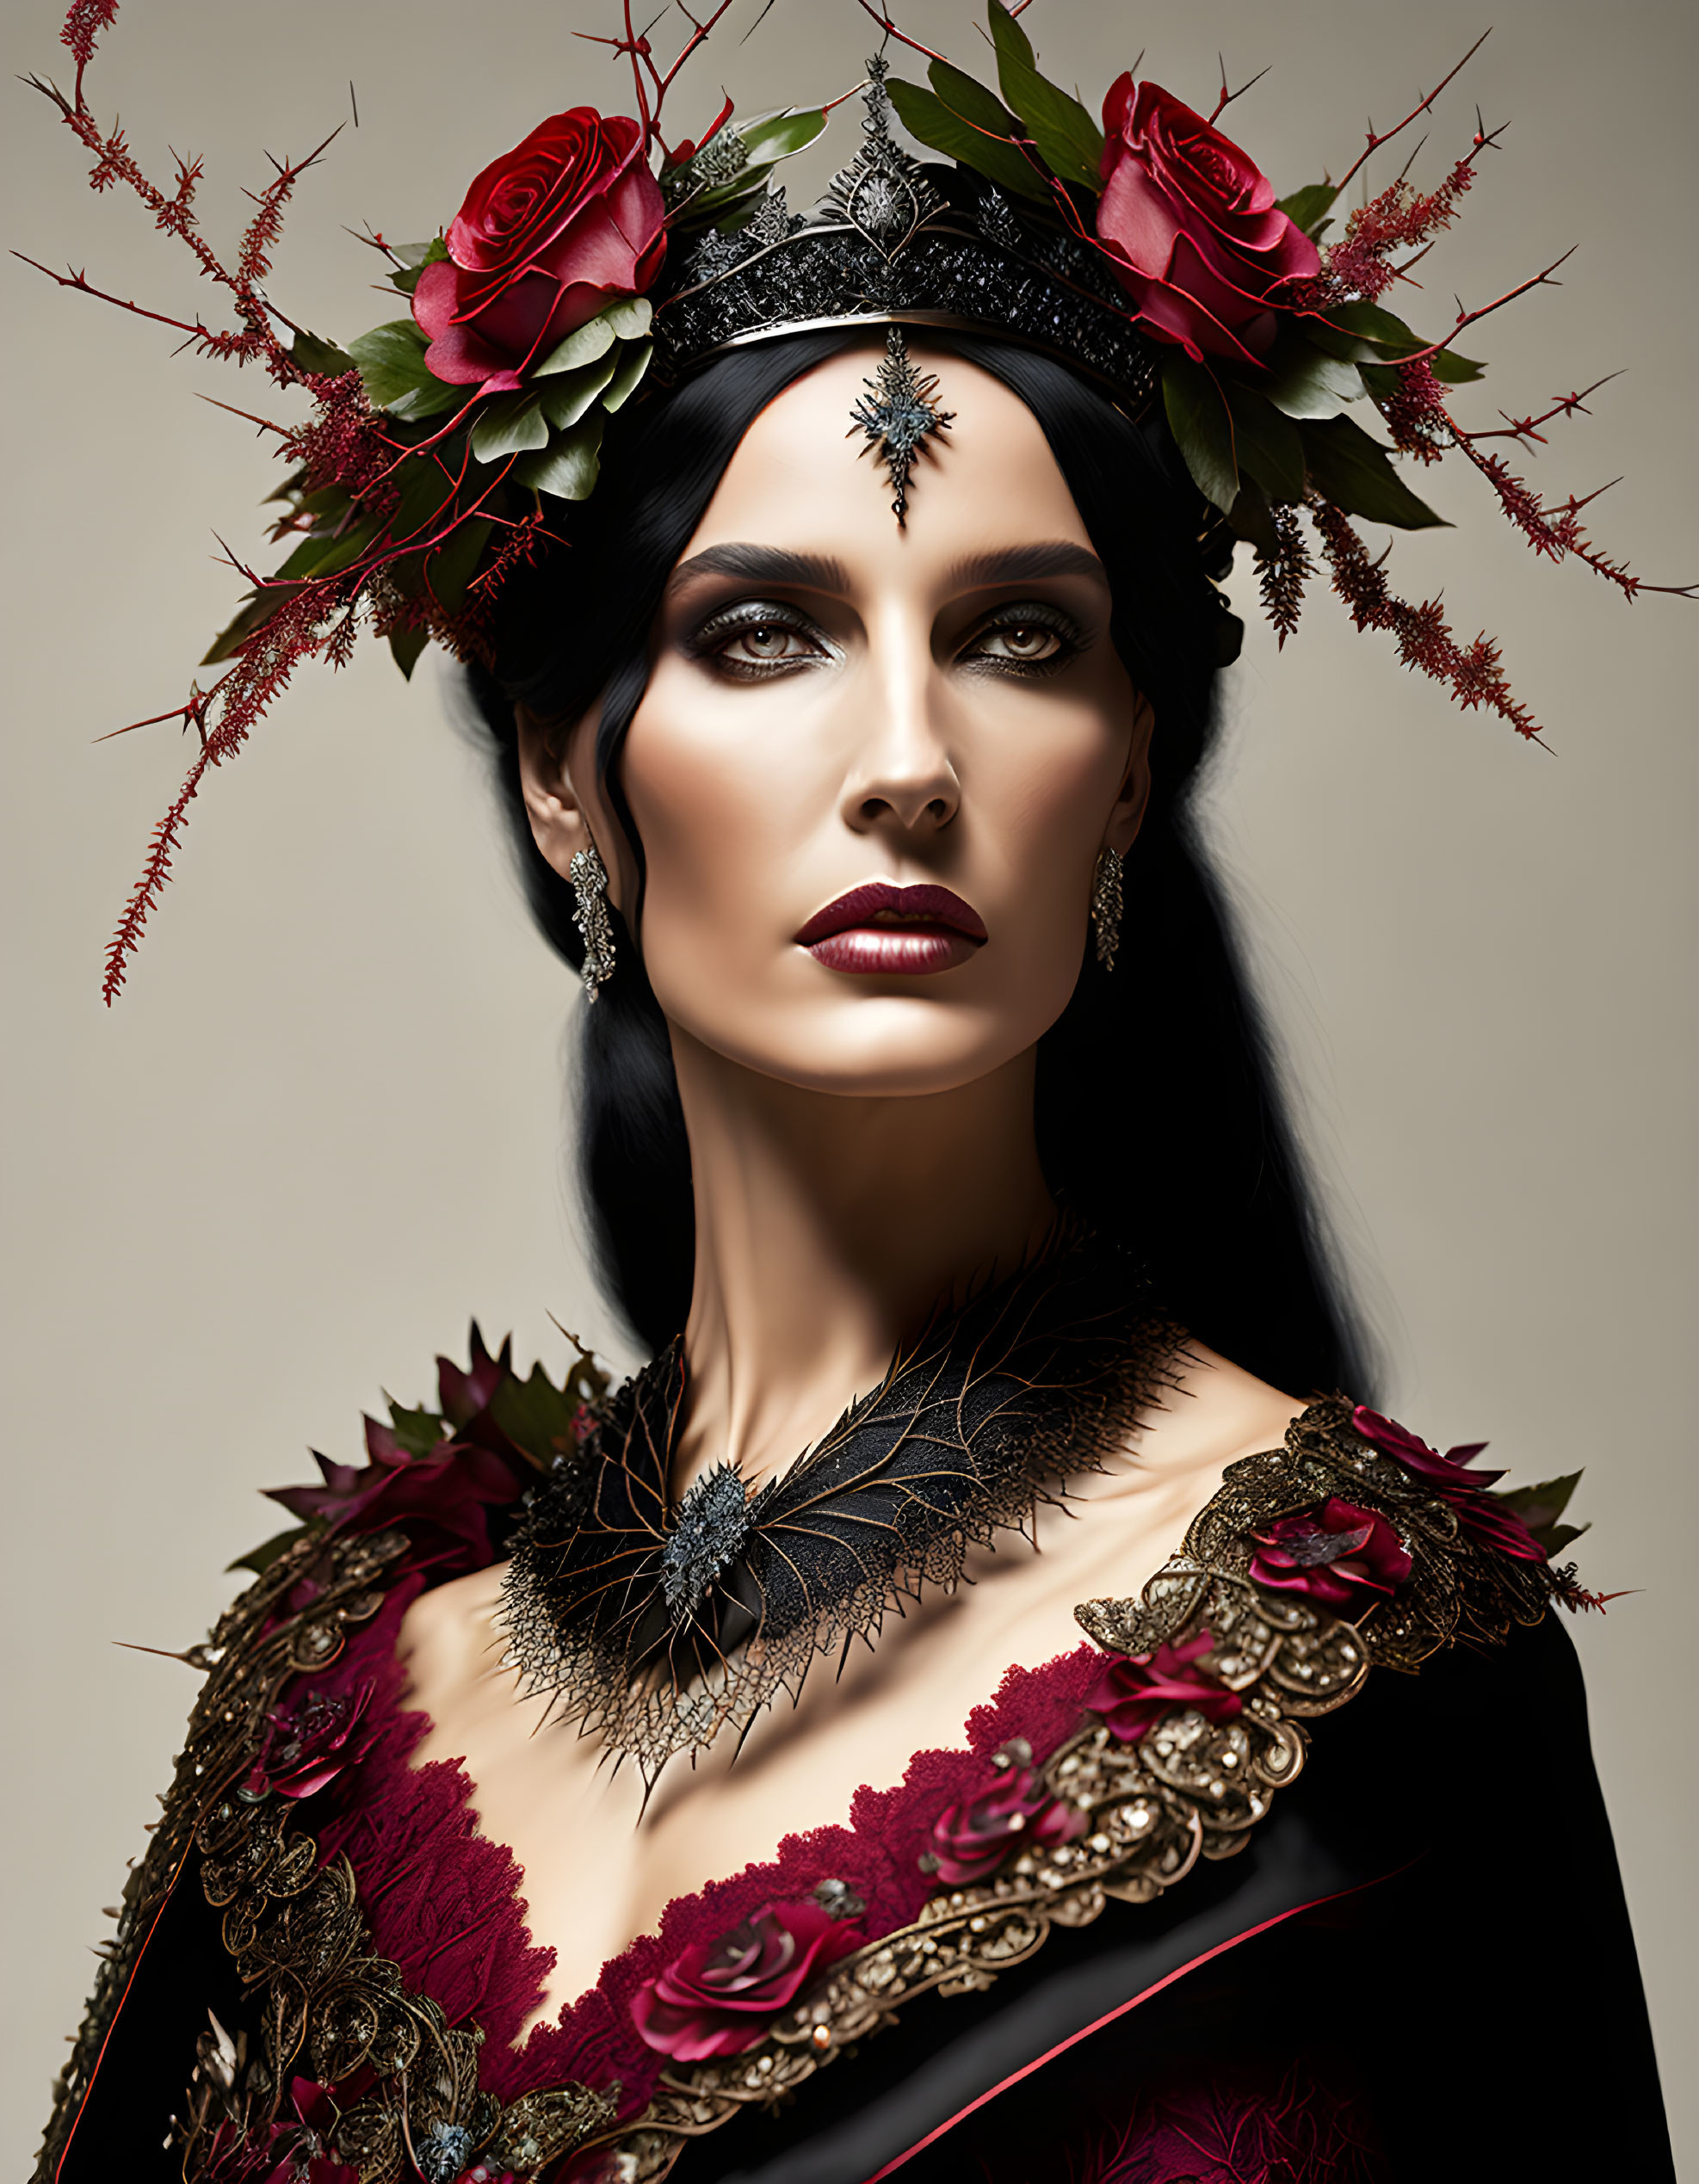 Portrait of a woman with dark hair and floral headpiece in dark dress with red embroidery.